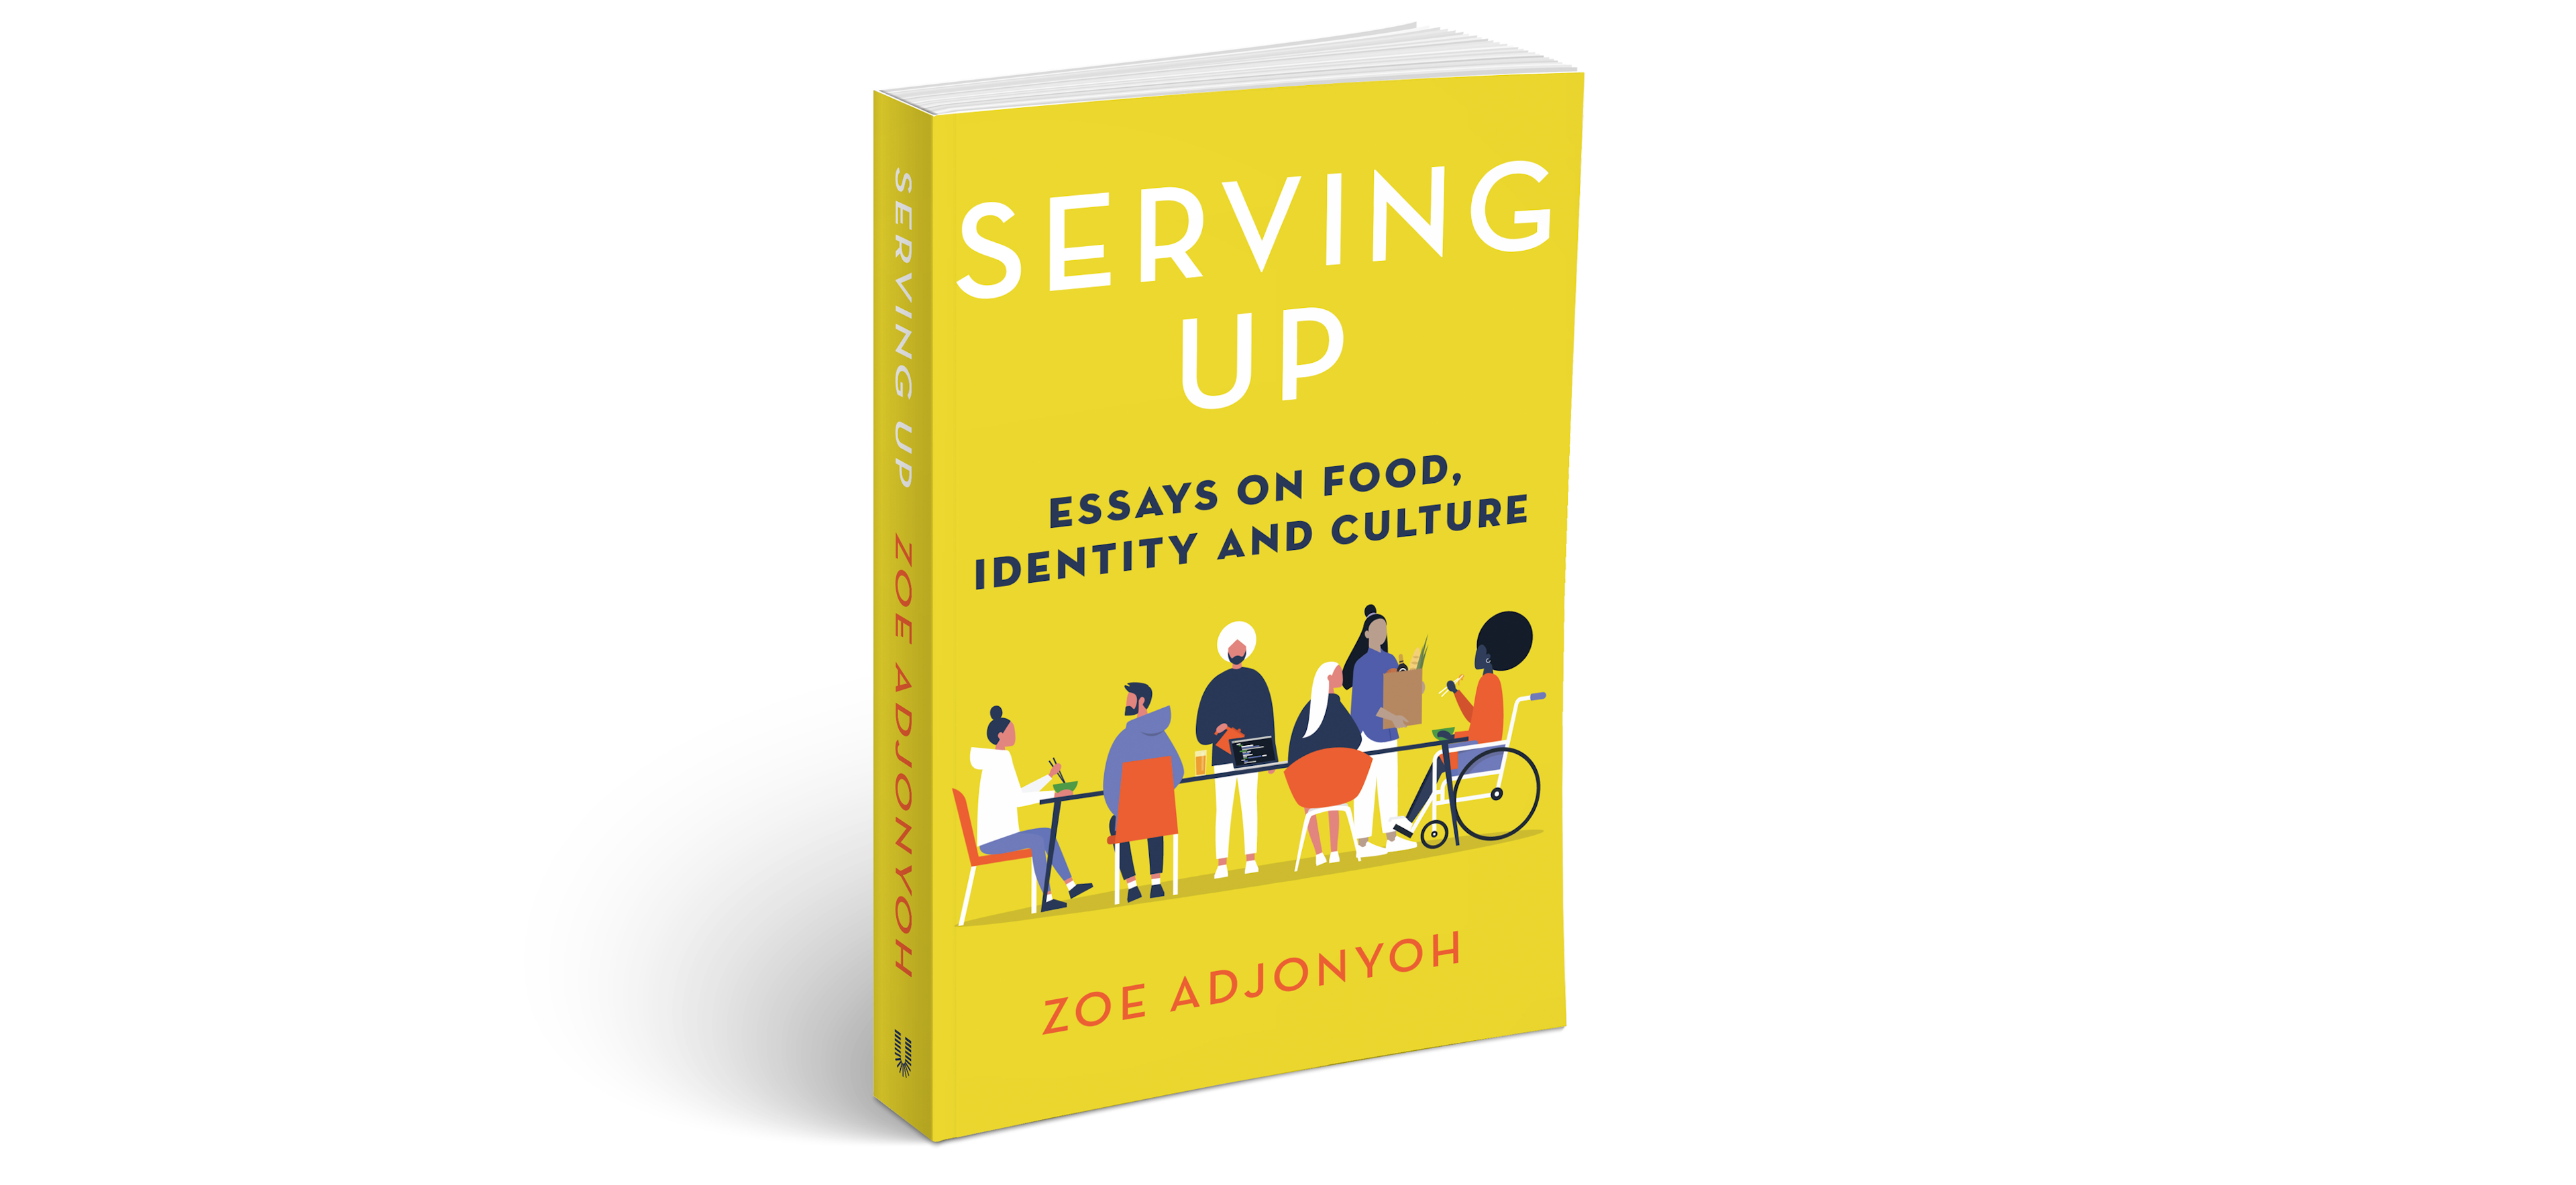 Serving Up: Essays on food, identity and culture